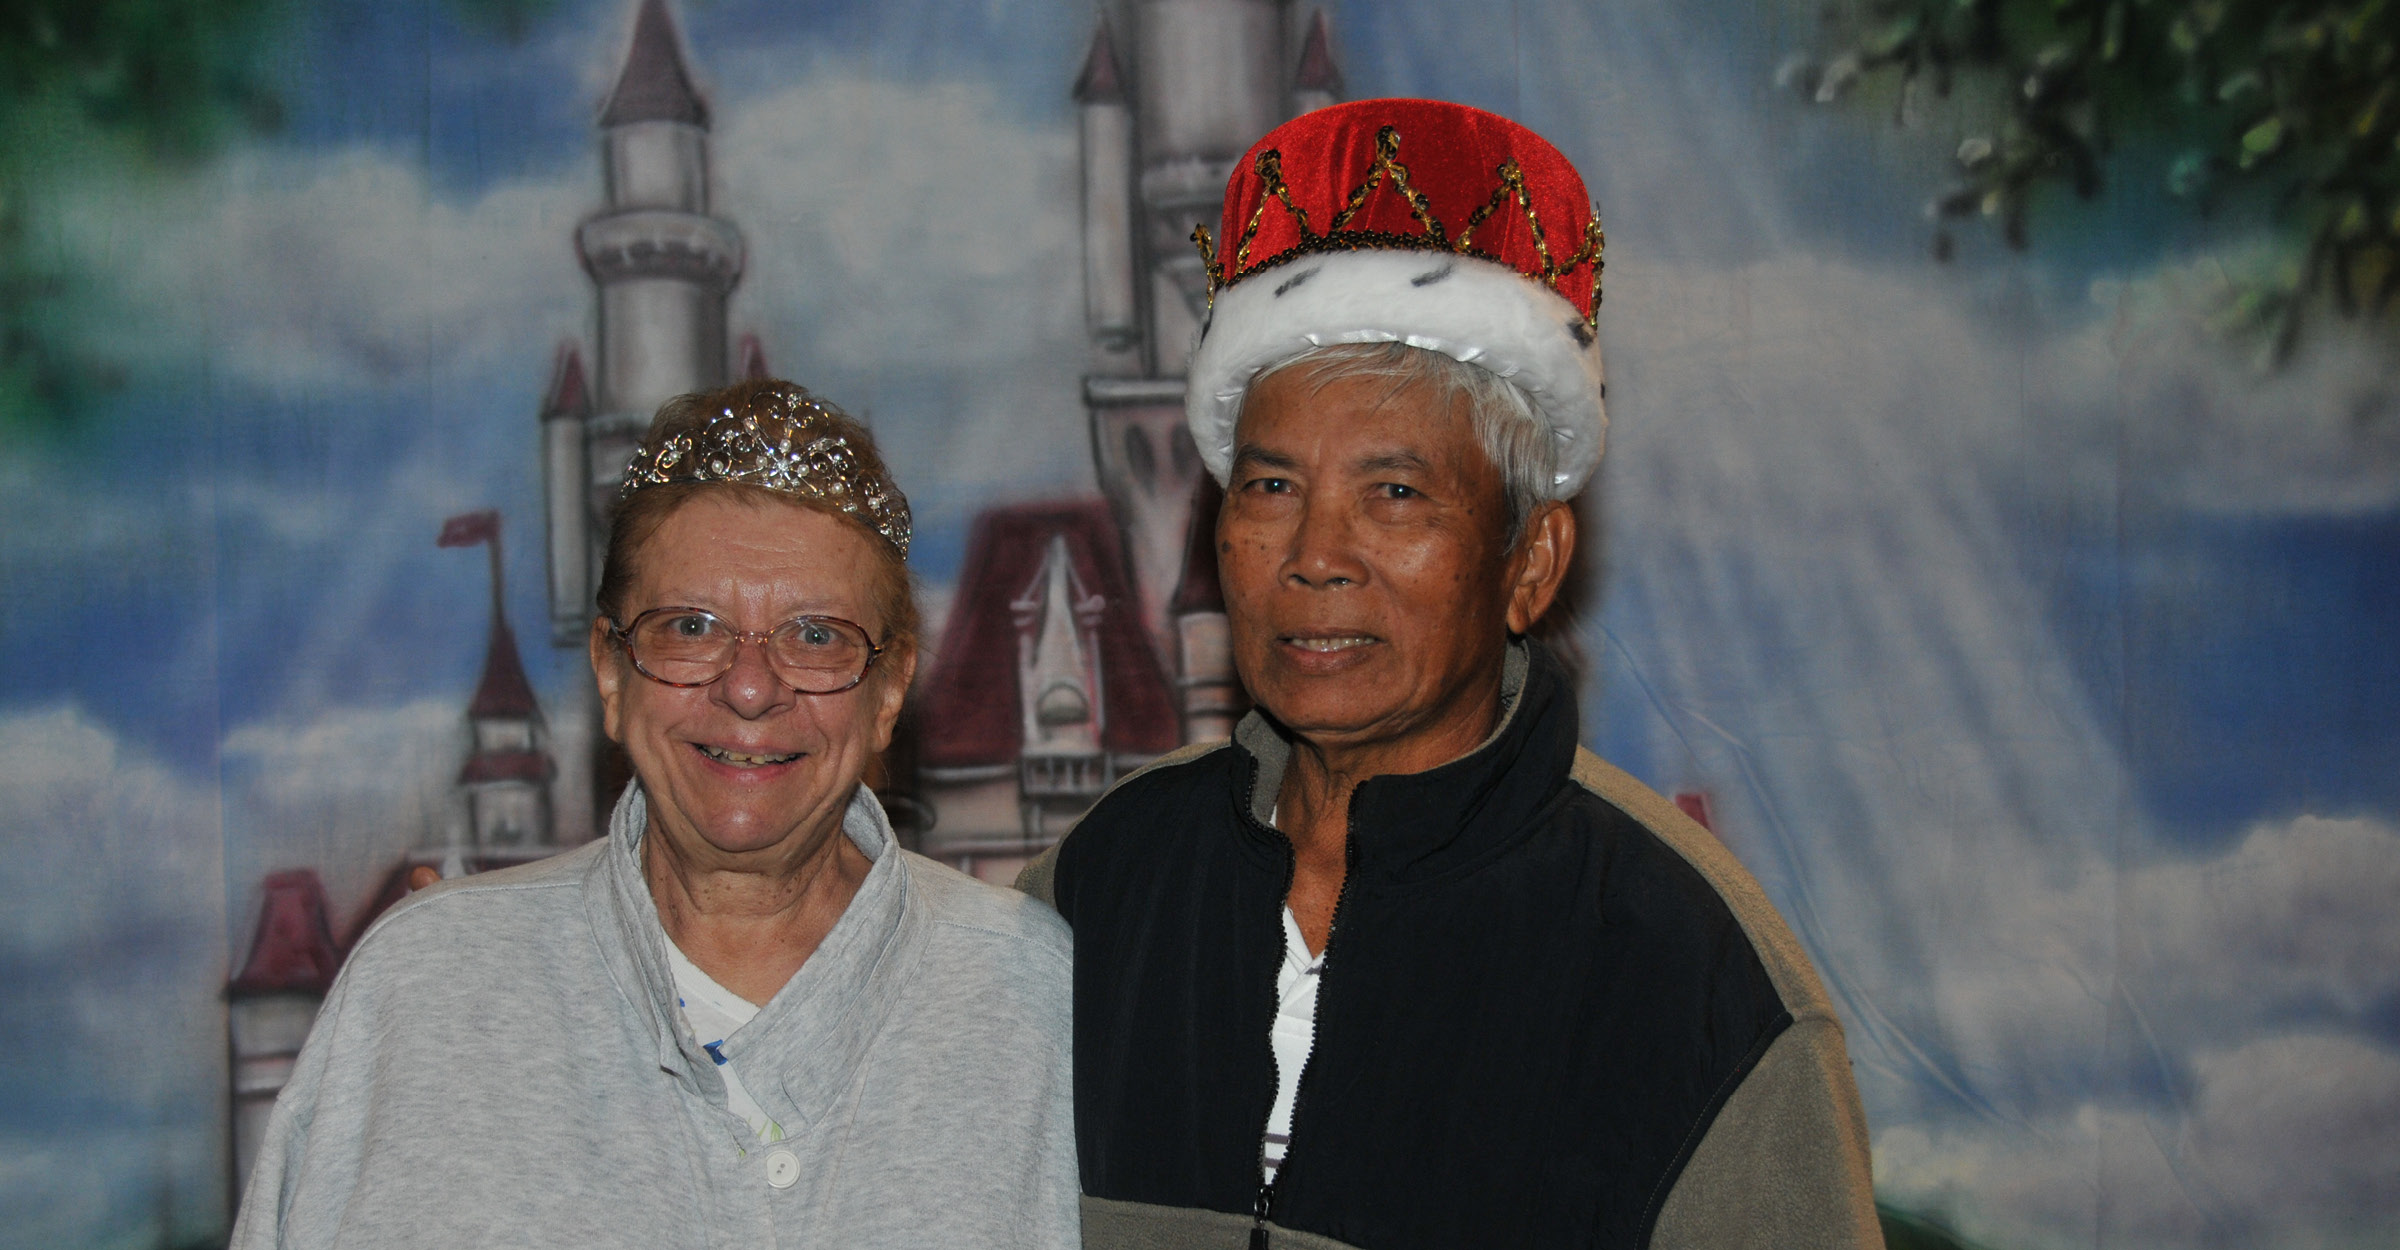 King & Queen with castle